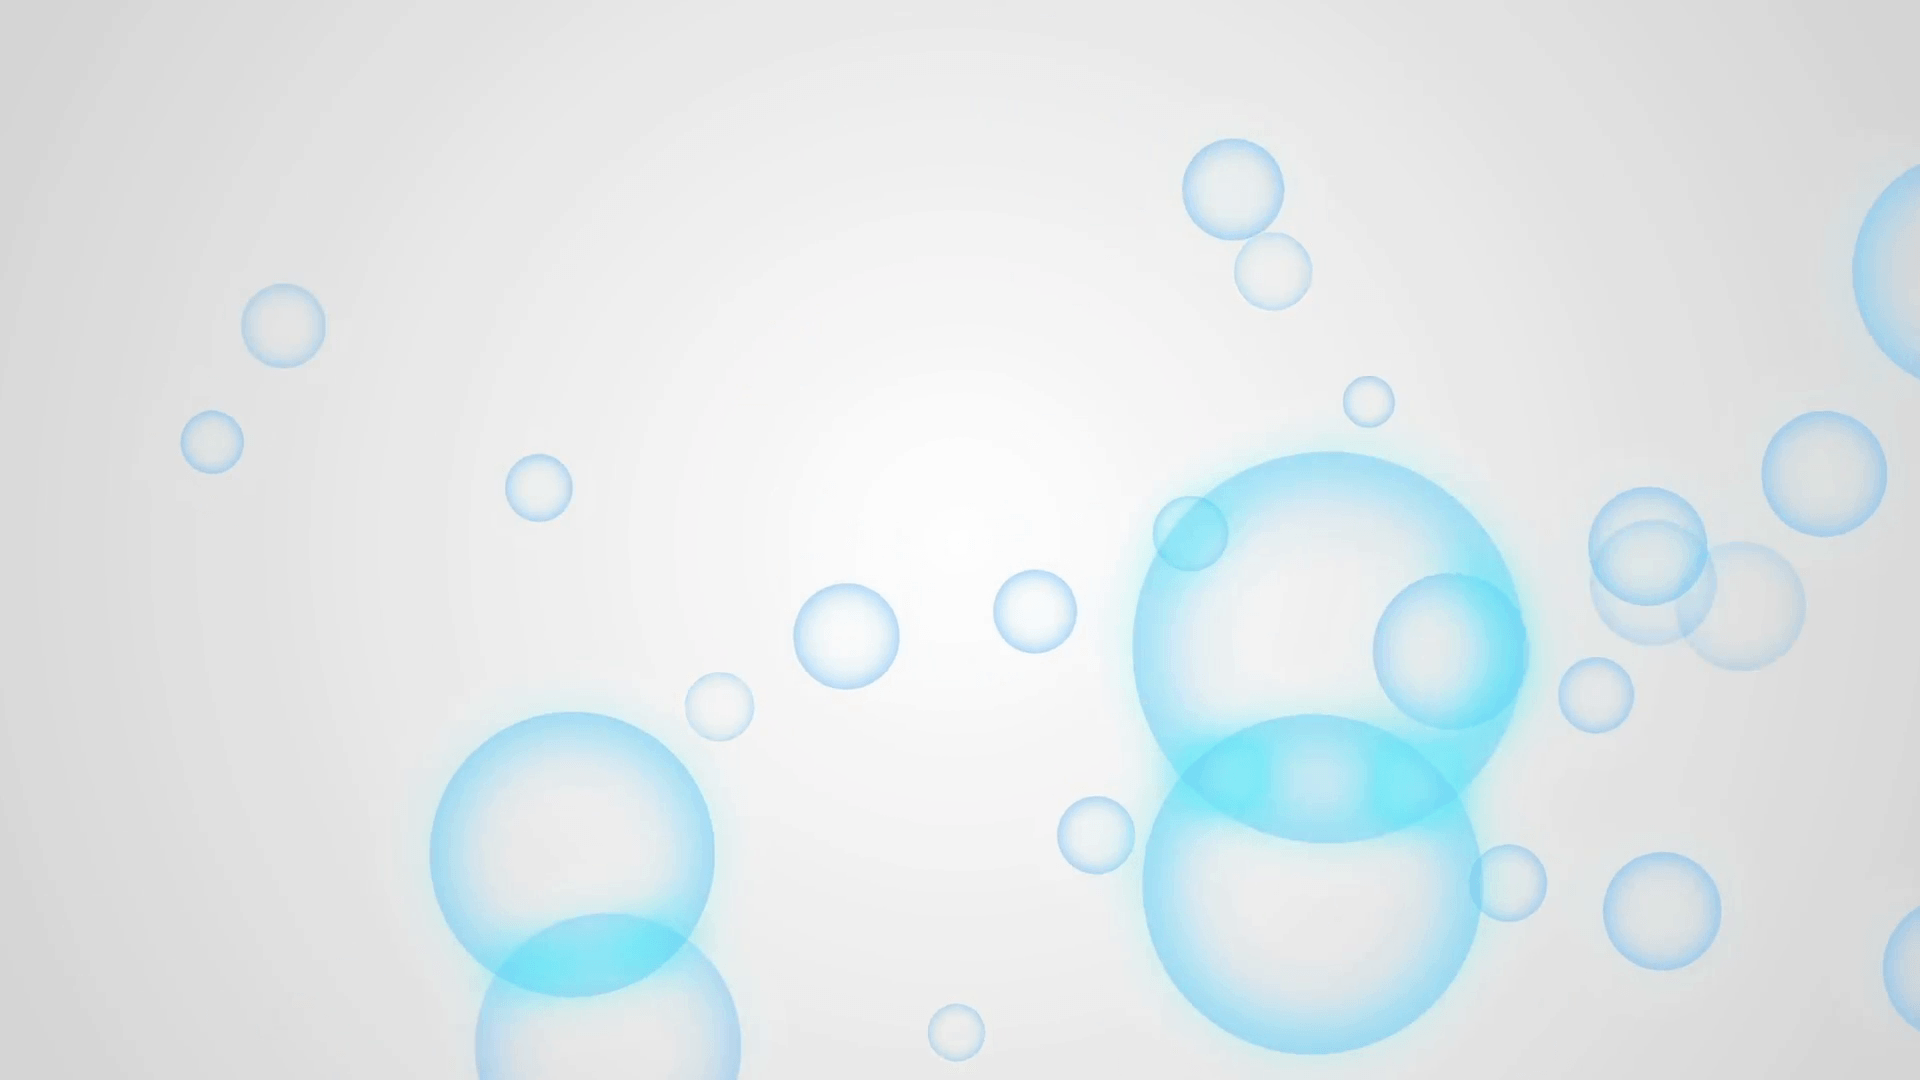 Animation of moving blue bubbles on a white background Motion